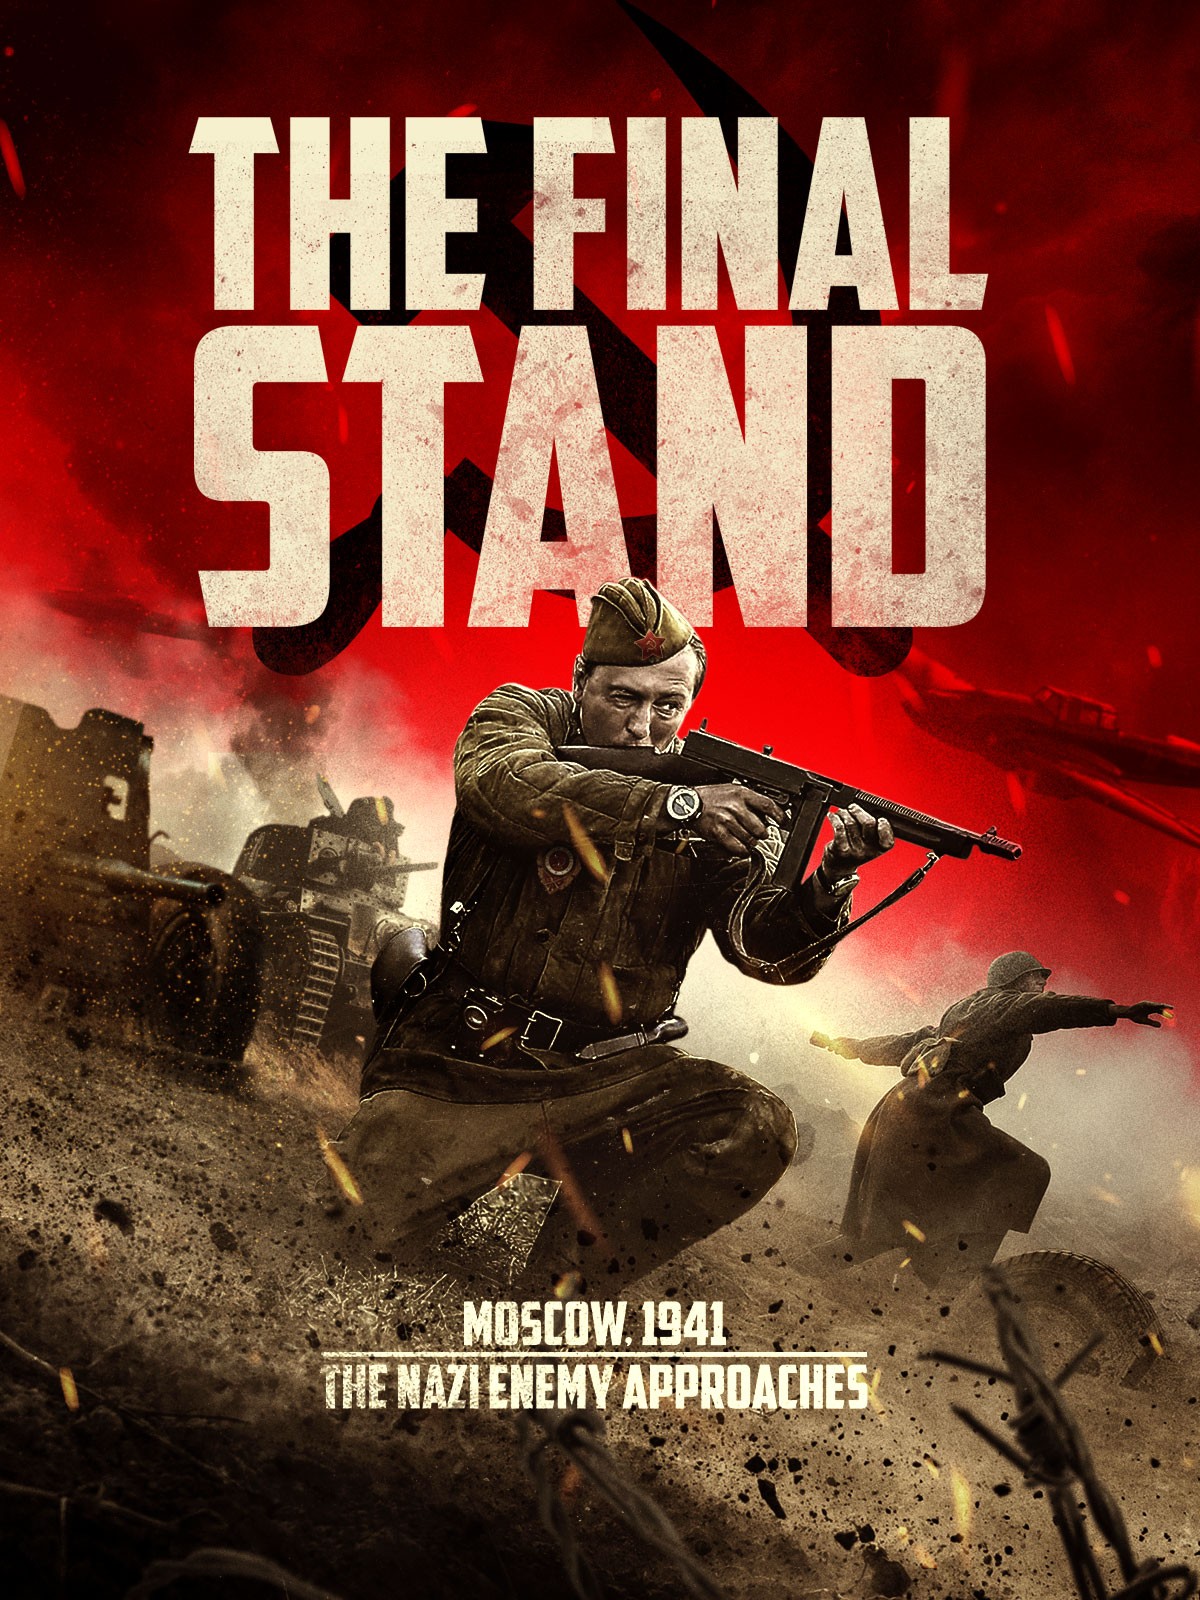 the stand movie poster